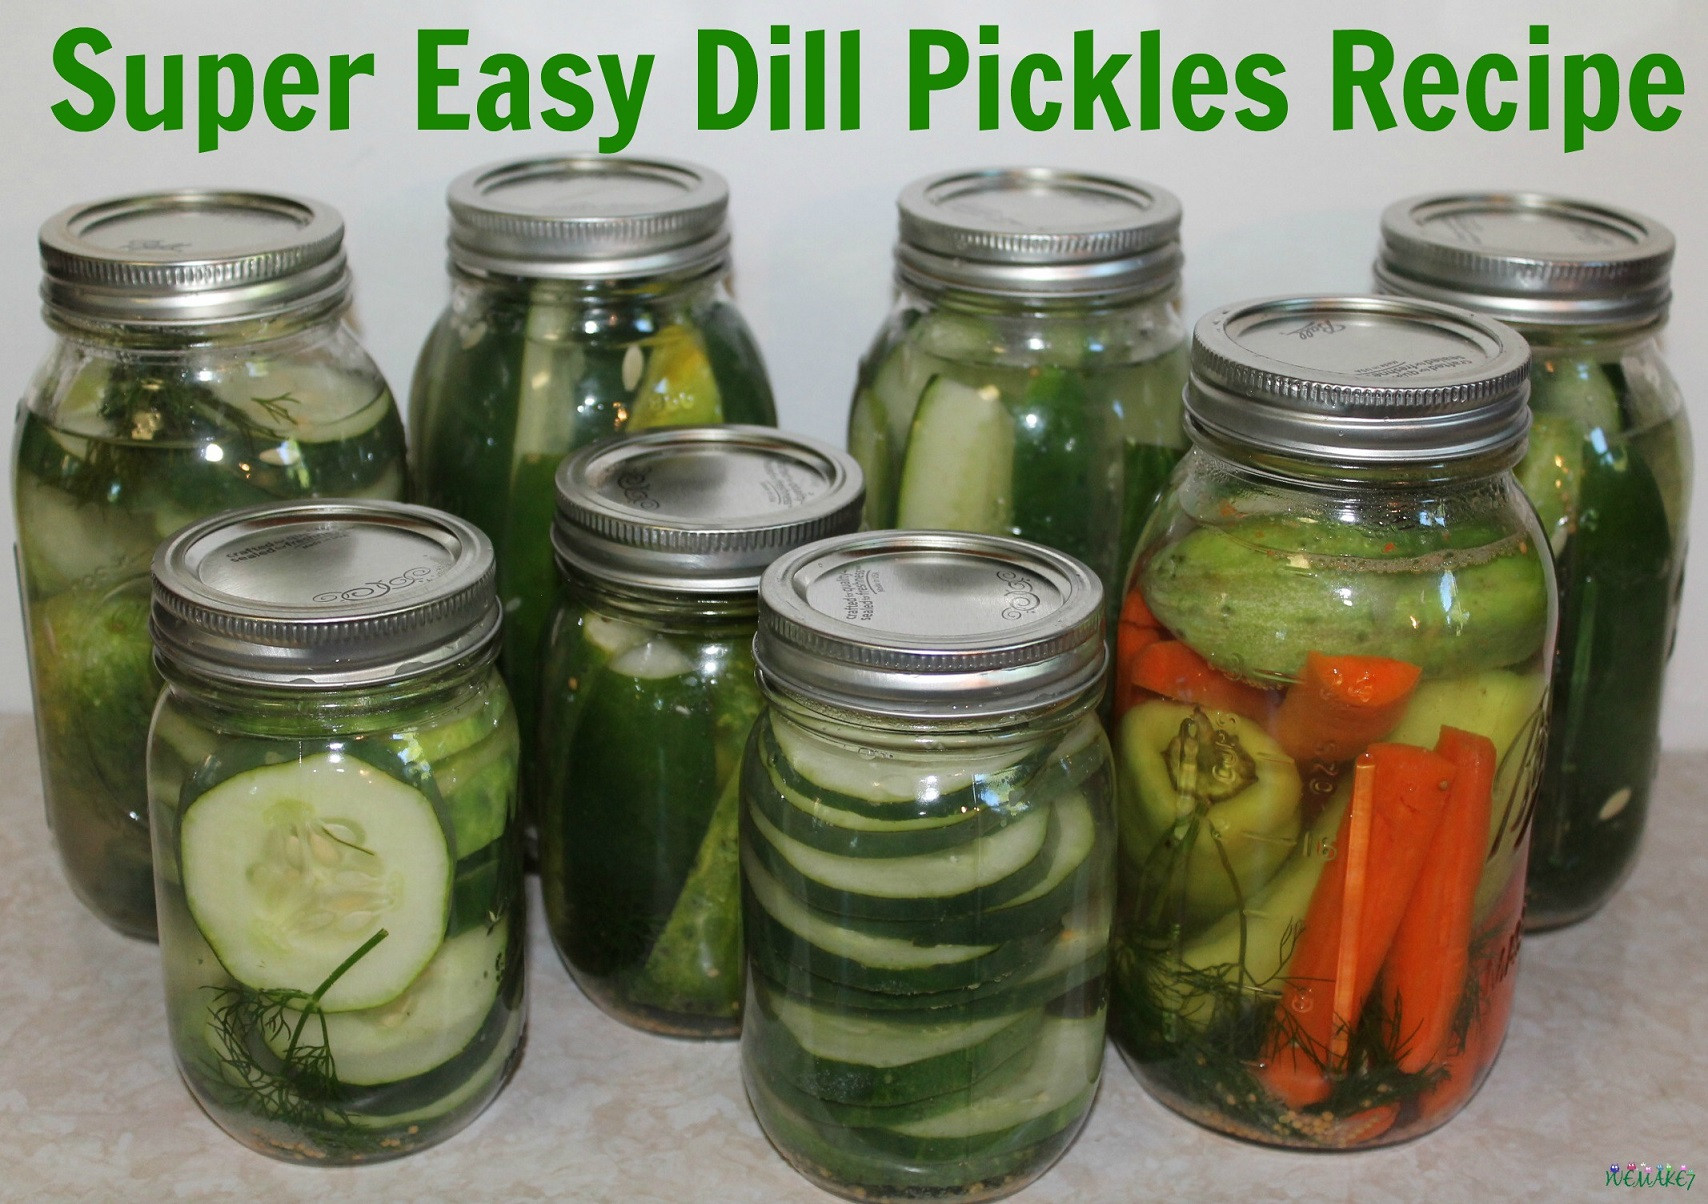 Dill Pickles Recipe For Canning
 Super Easy Dill Pickles Recipe WEMAKE7